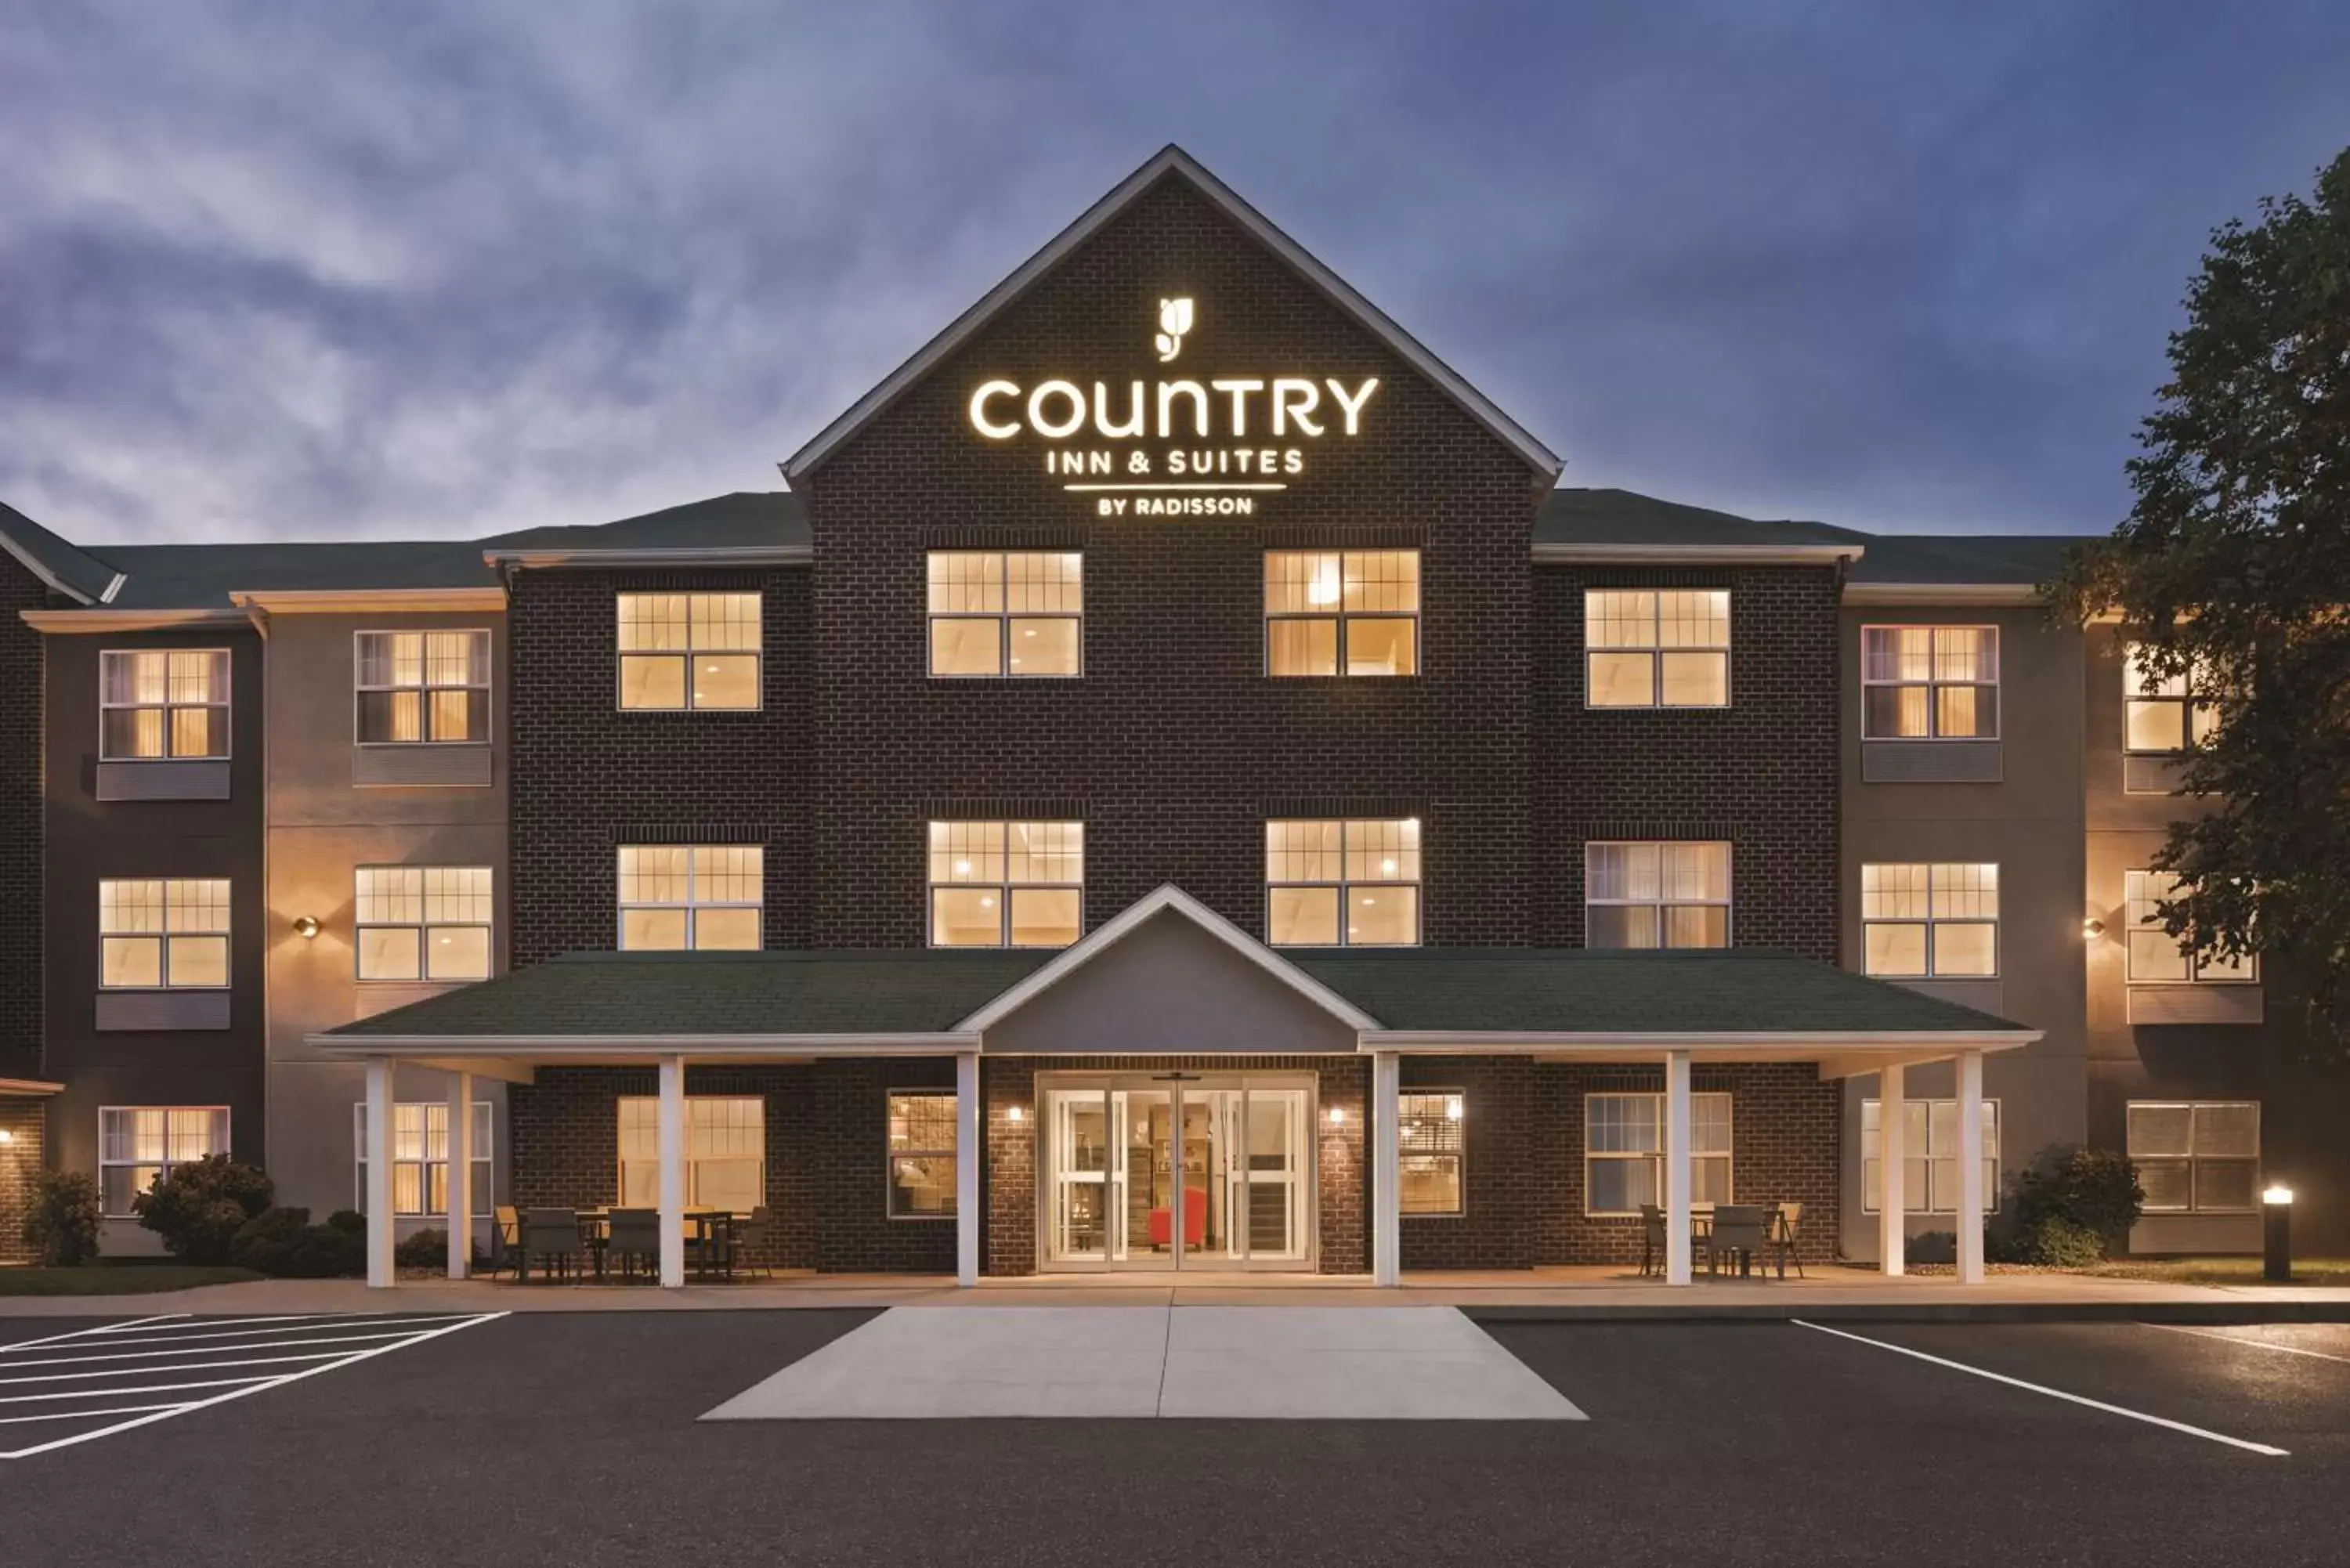 Property Building in Country Inn & Suites by Radisson, Cottage Grove, MN